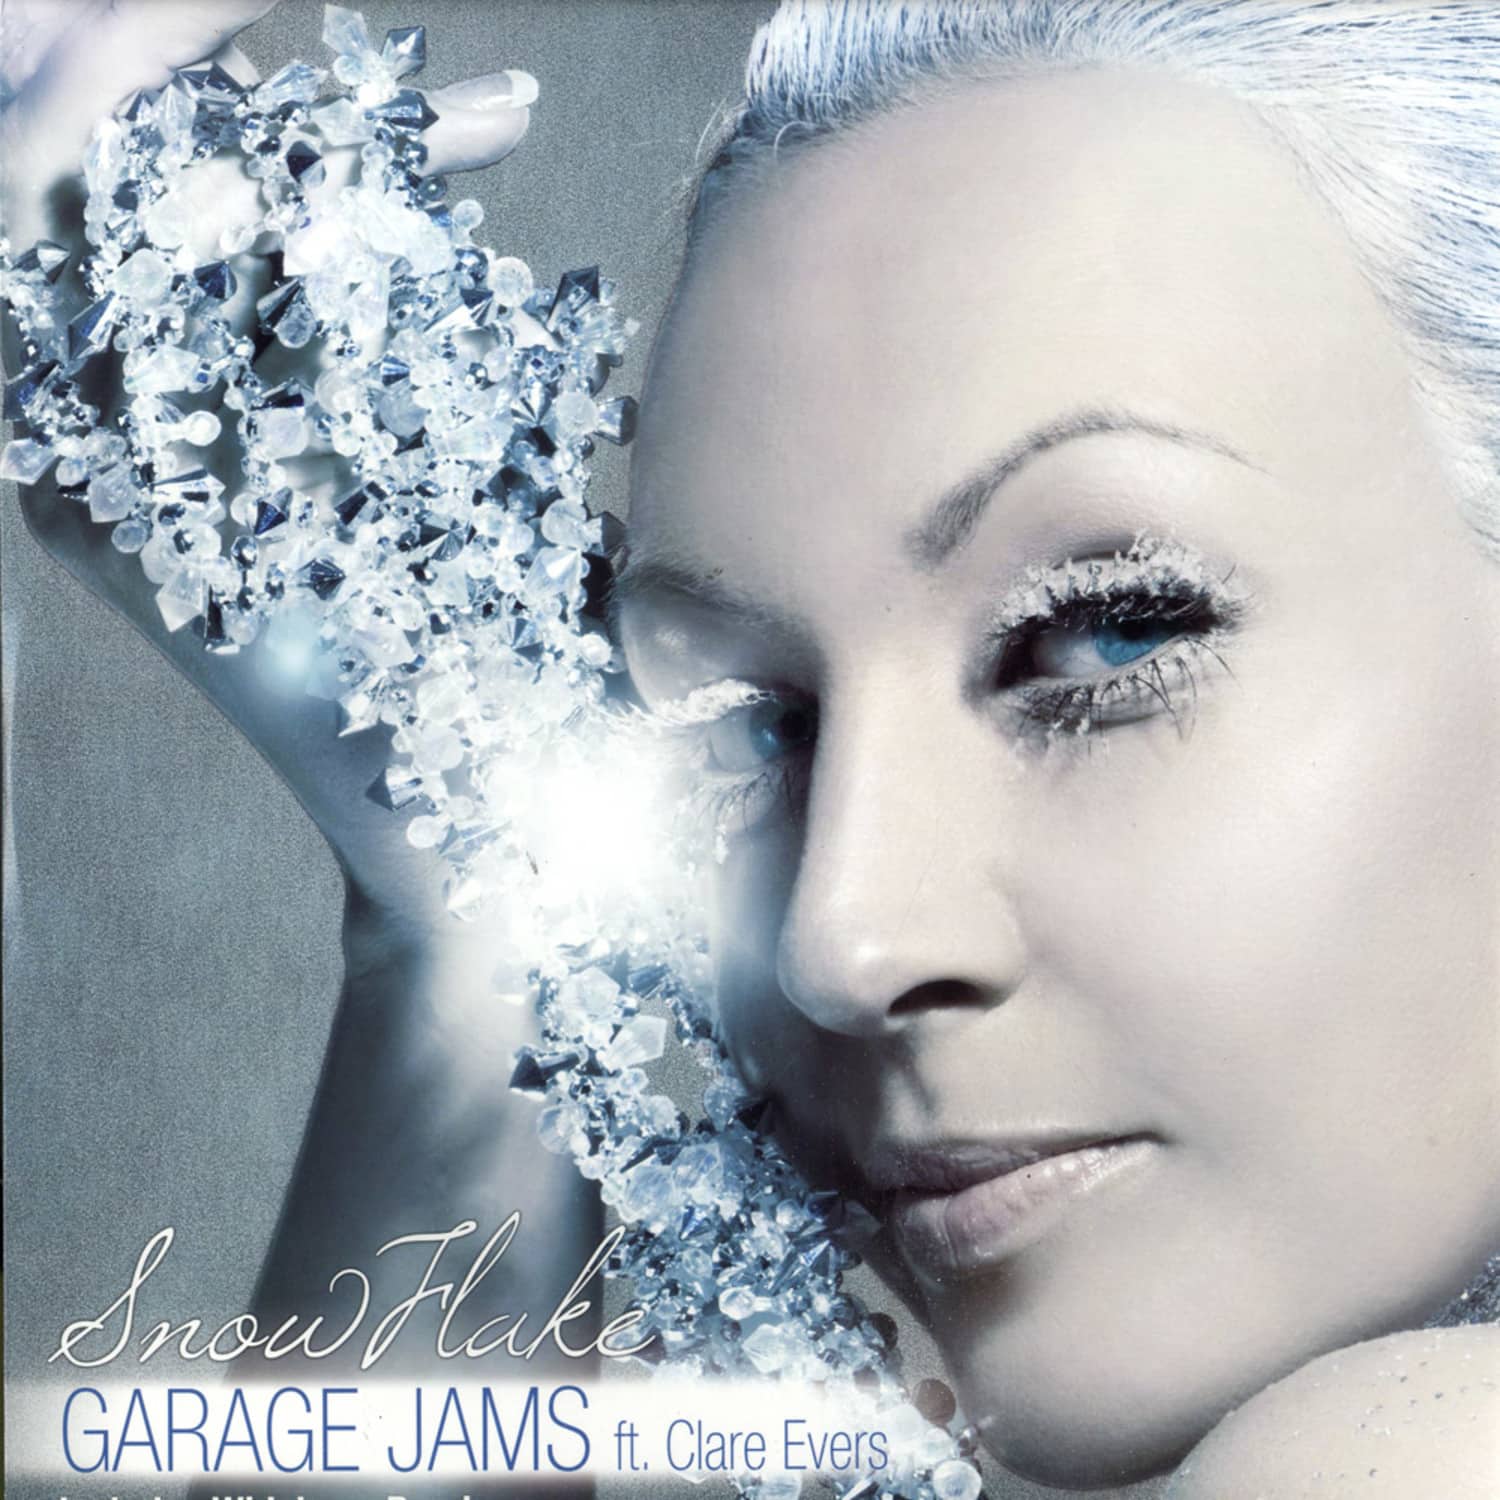 Garage Jams feat. Clare Evers - SNOWFLAKE